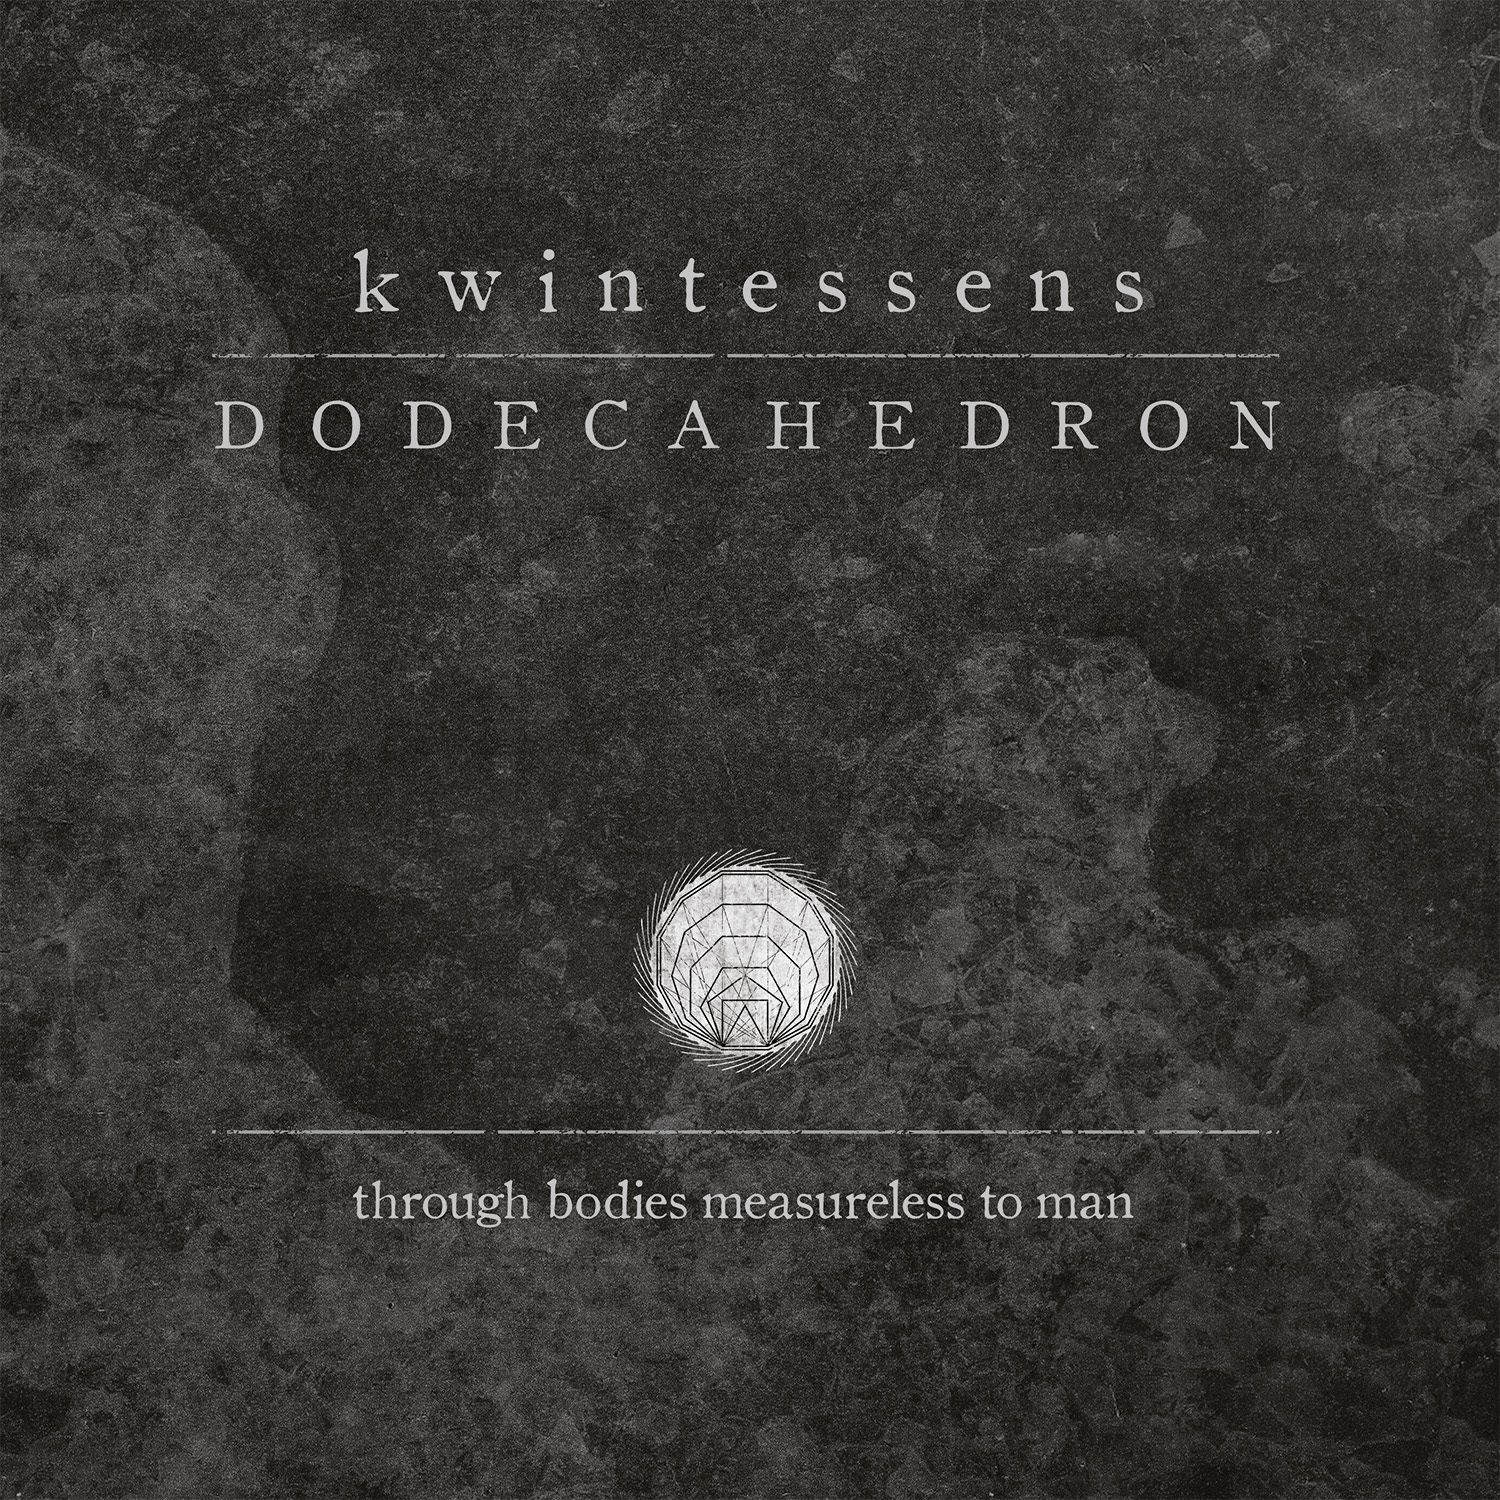 Dodecahedron feiern 'Tetrahedron - The Culling From The Unwanted From The Earth'-Premiere